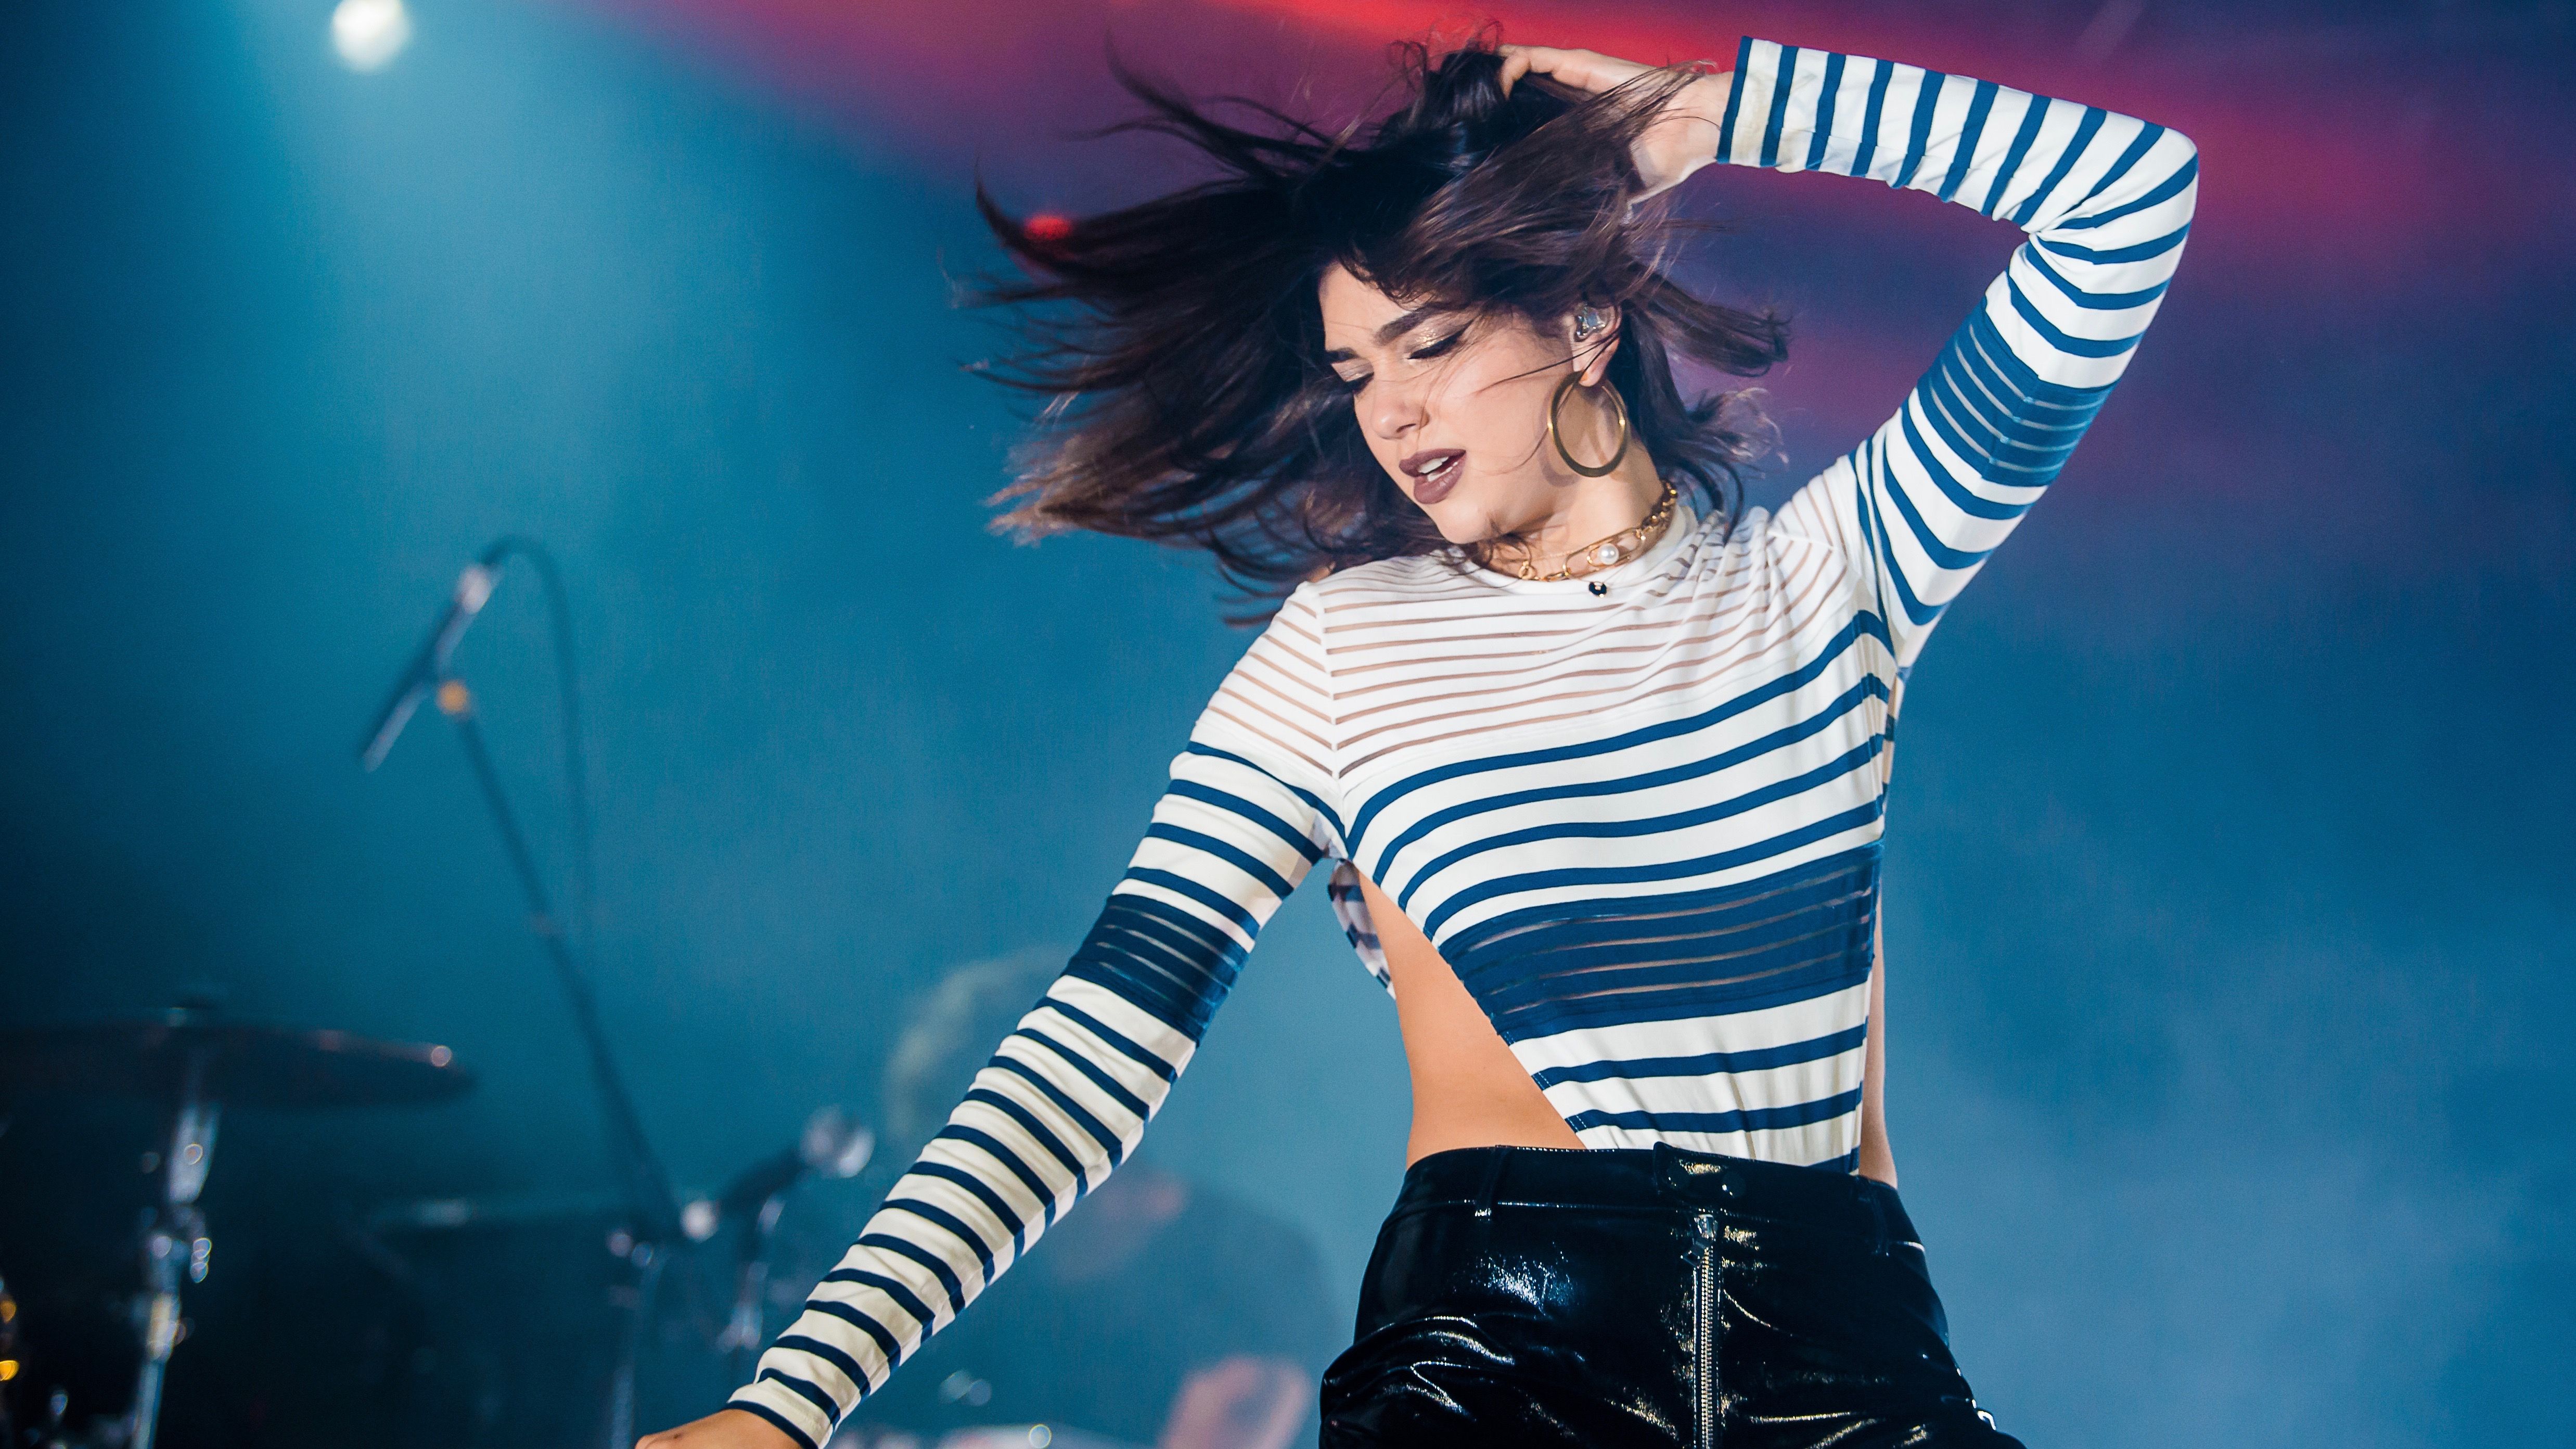 Dua Lipa Becomes The Youngest Female Artist To Hit 1 Billion YouTube